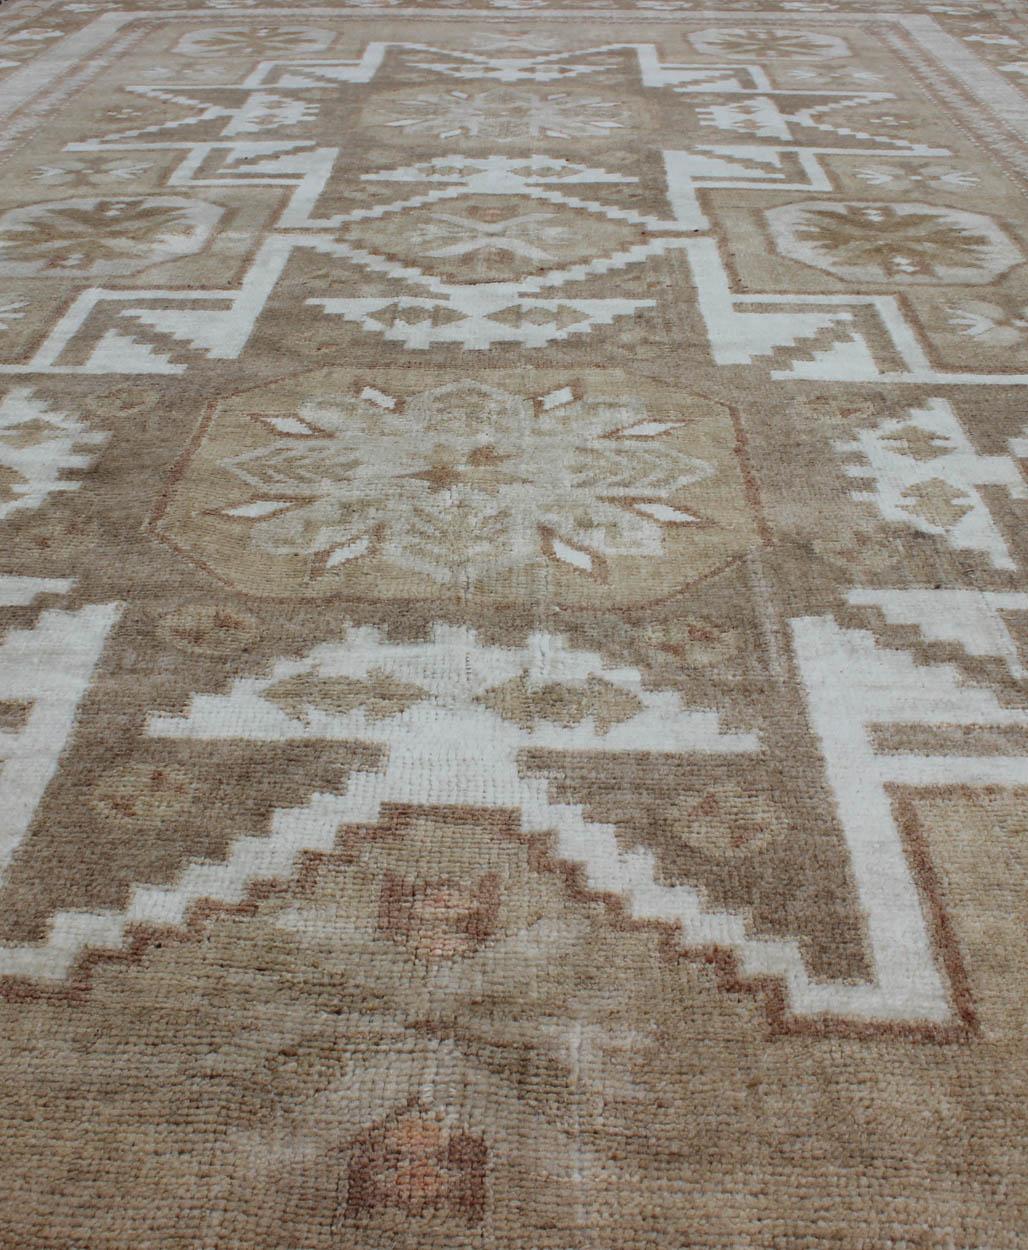 Mid-20th Century Tribal Turkish Vintage Rug with Starburst Pendants in Ivory, Green & Light Brown For Sale